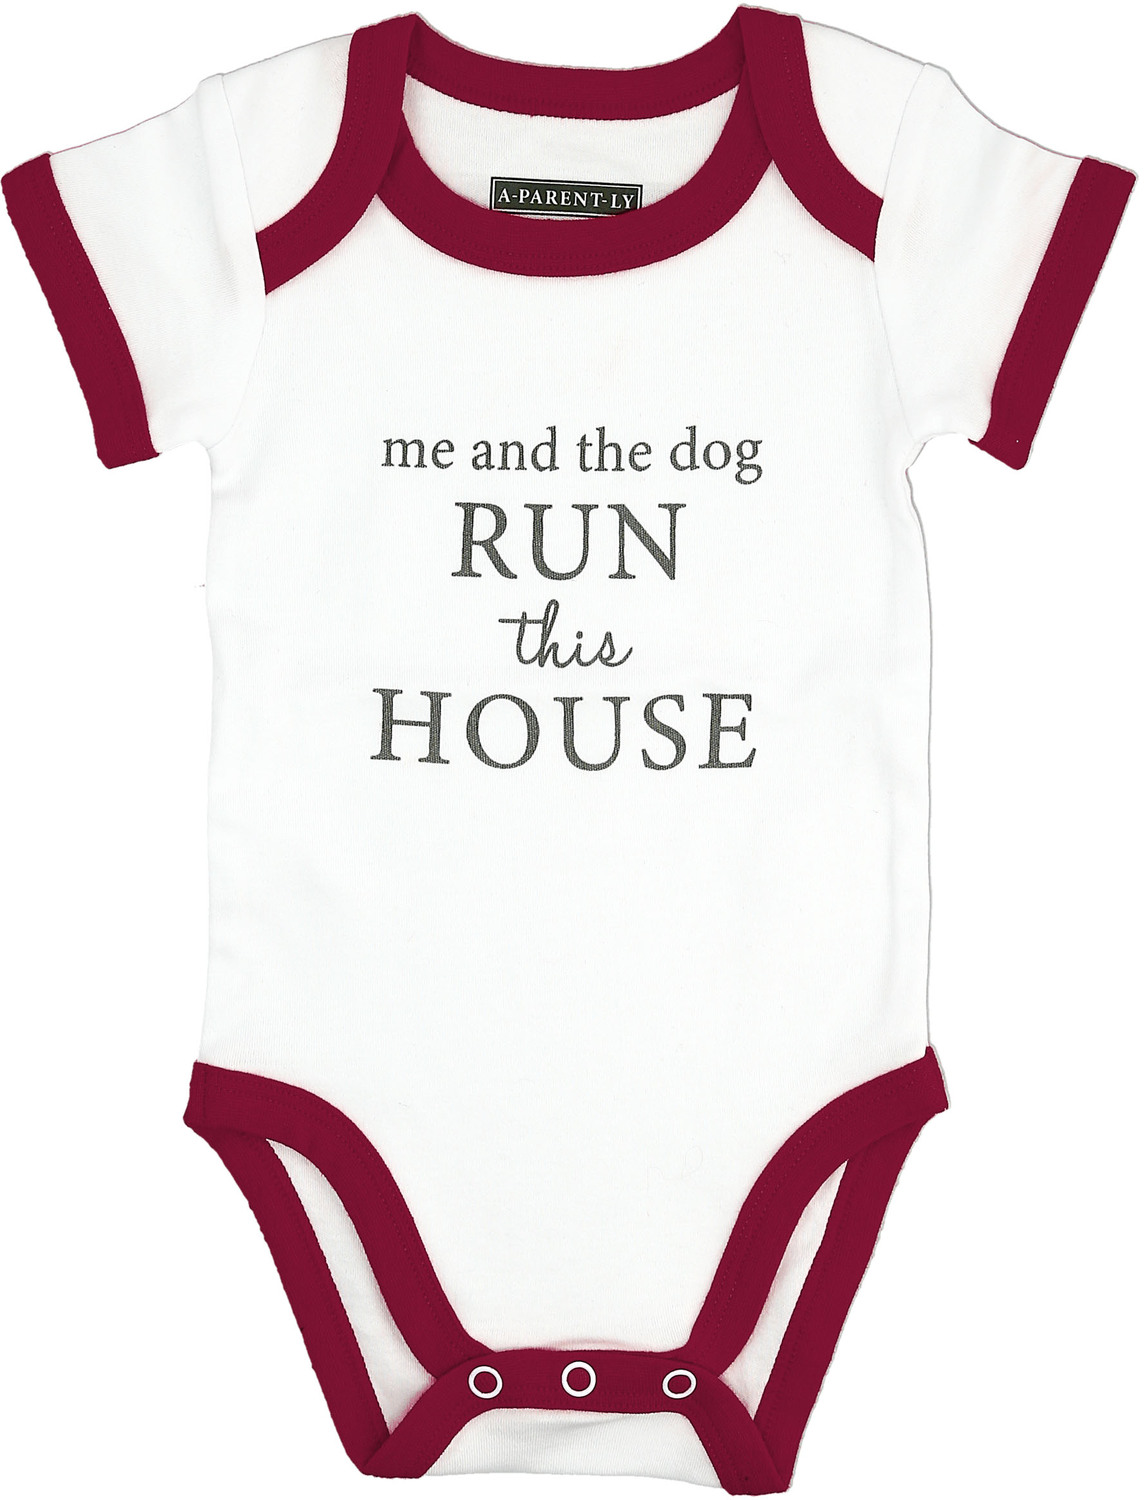 Run The House by A-Parent-ly - Run The House - 6-12 Months Burgundy Trimmed Bodysuit